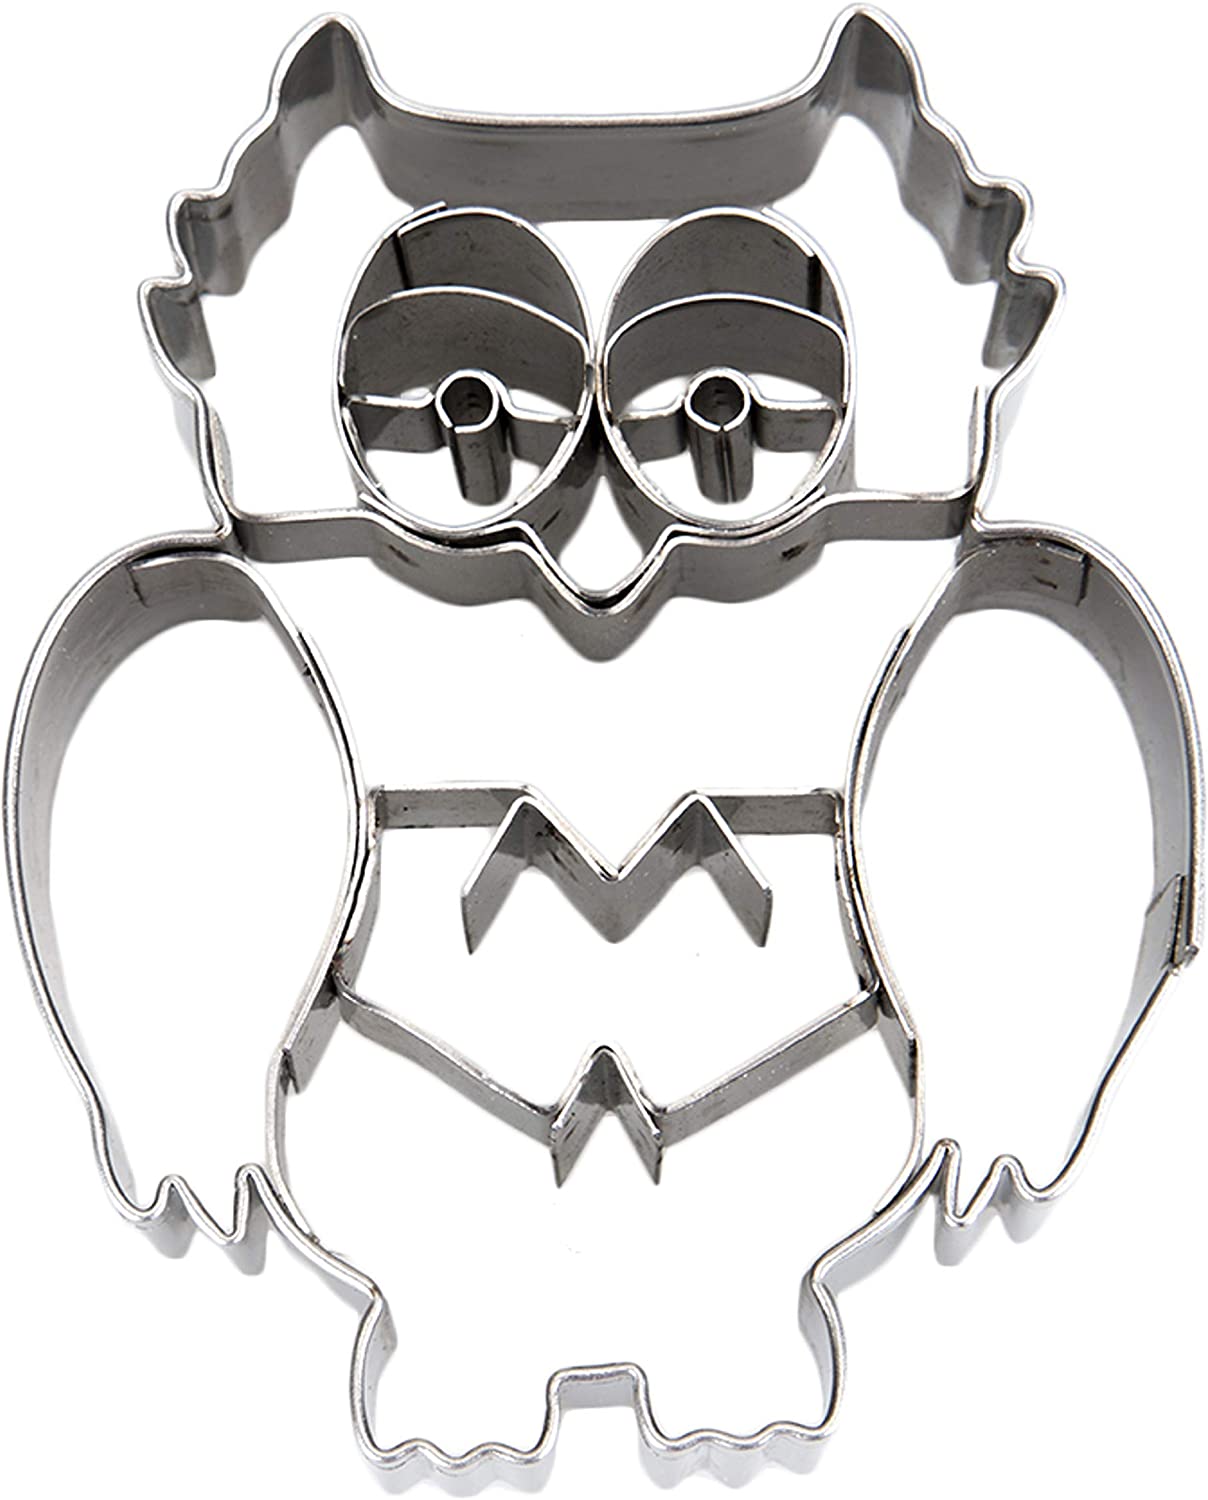 Staedter Owl Cookie Cutter